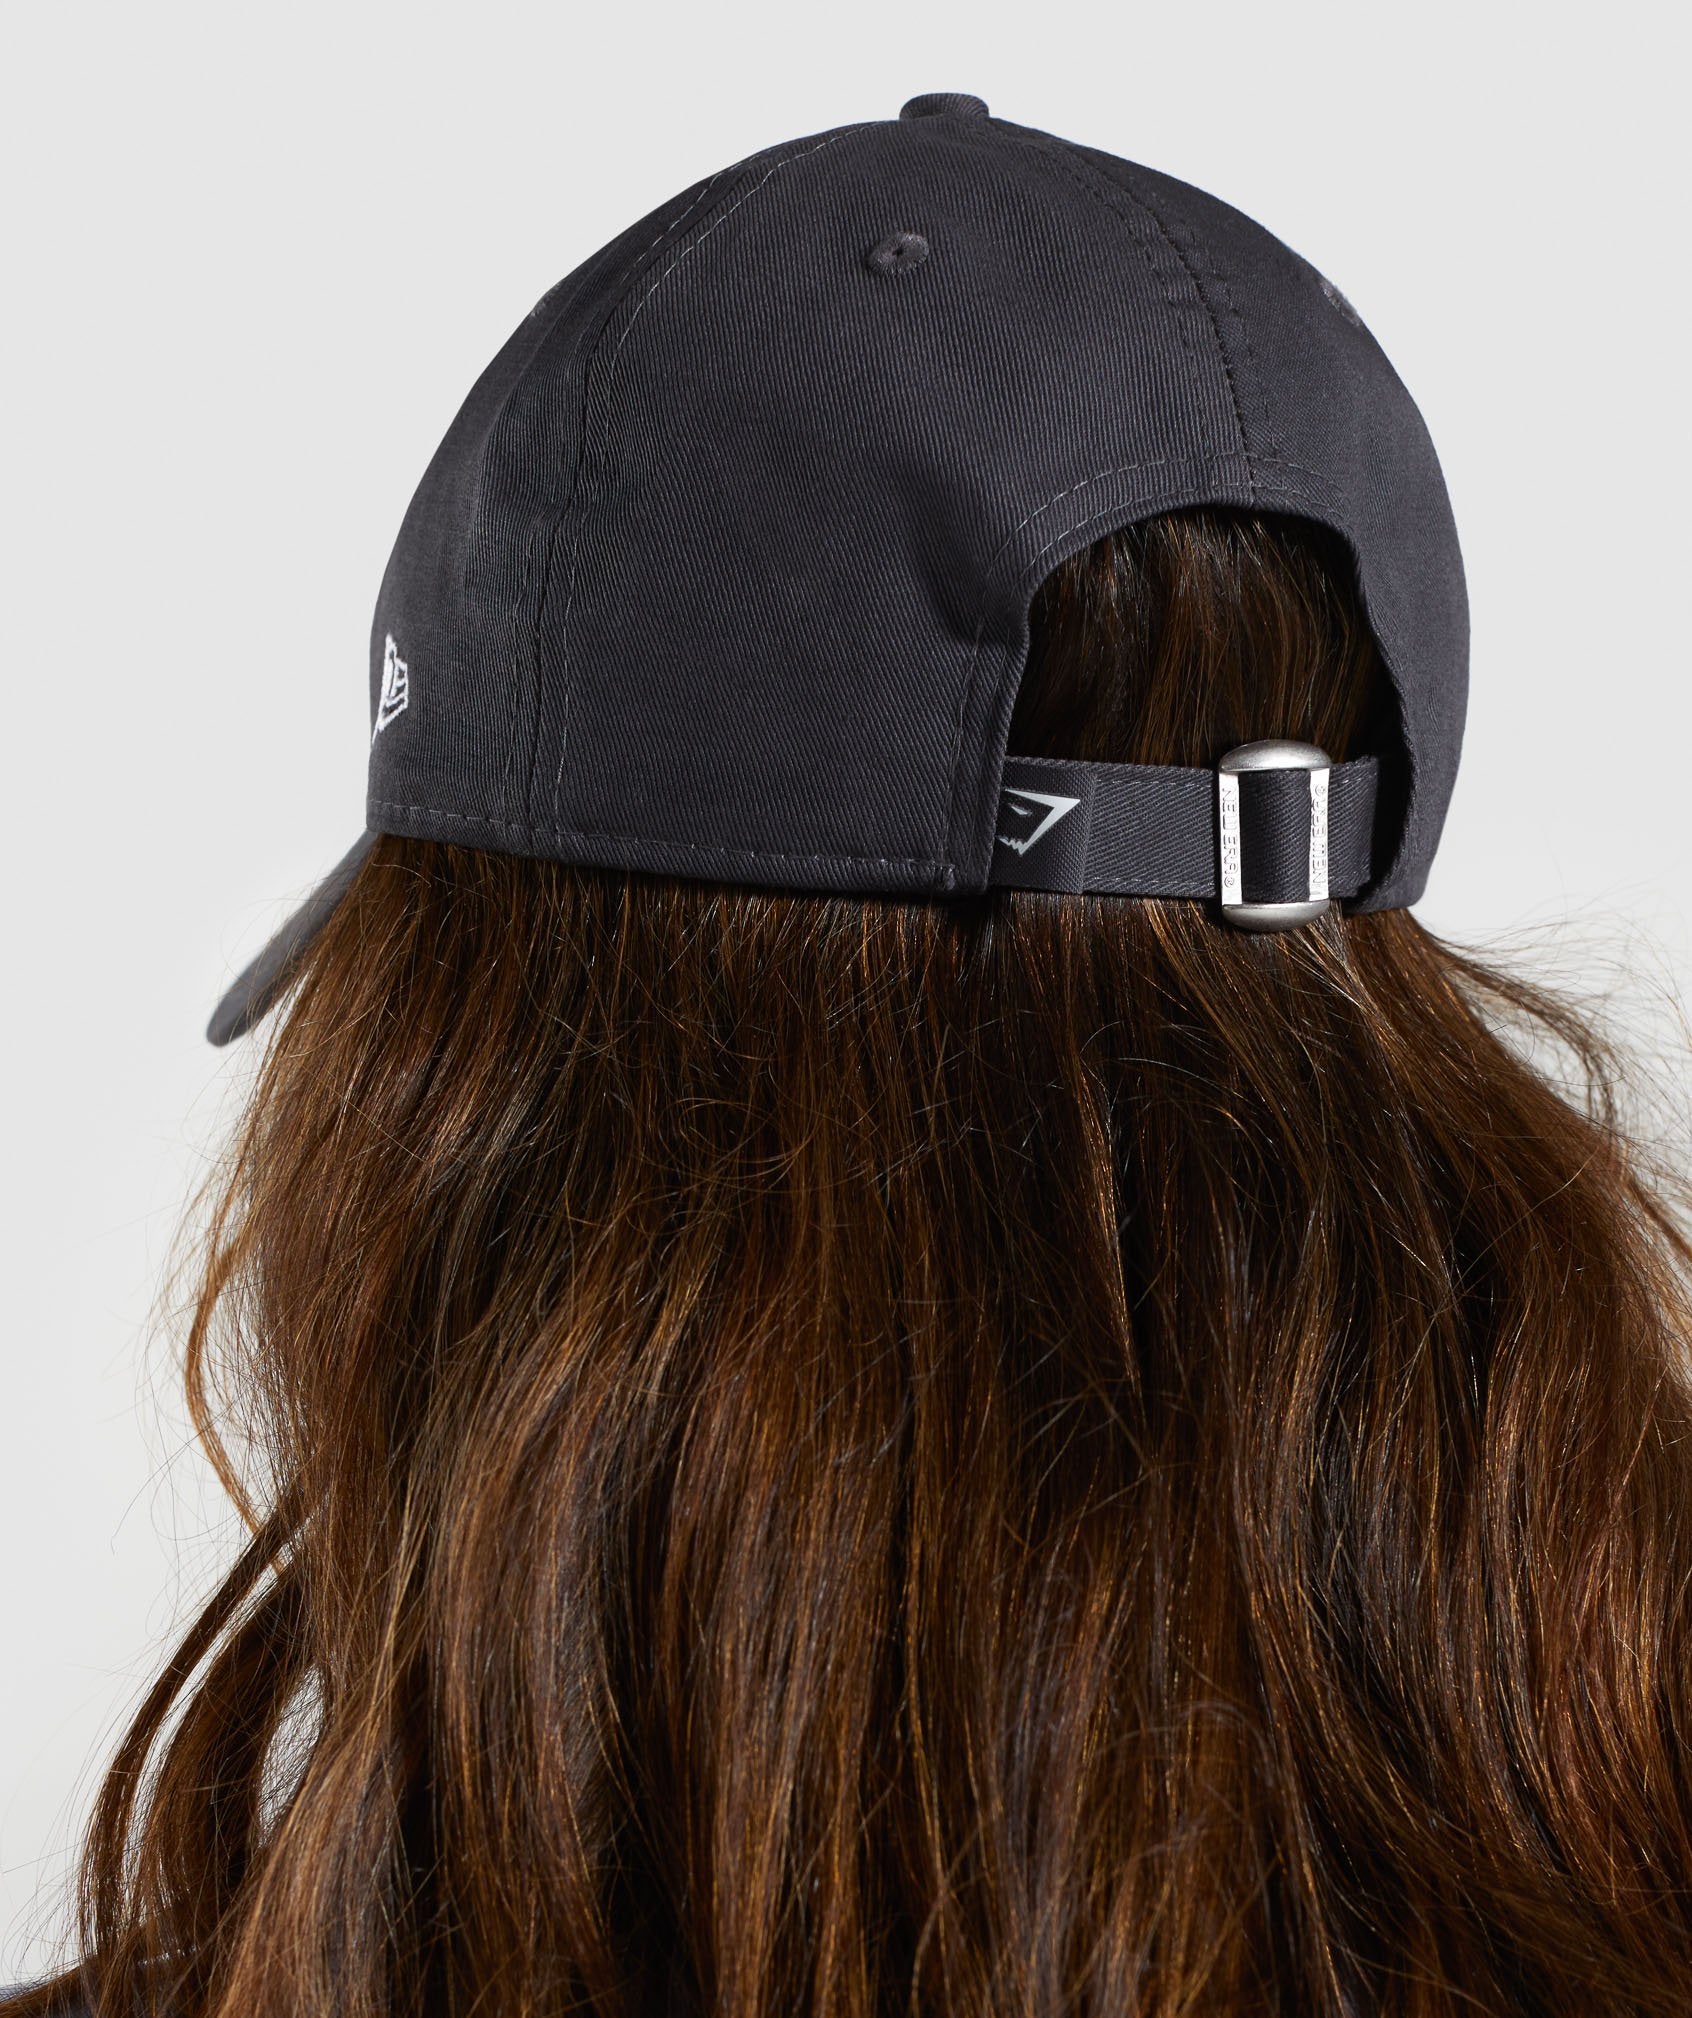 New Era 9FORTY Adjustable in Charcoal - view 6